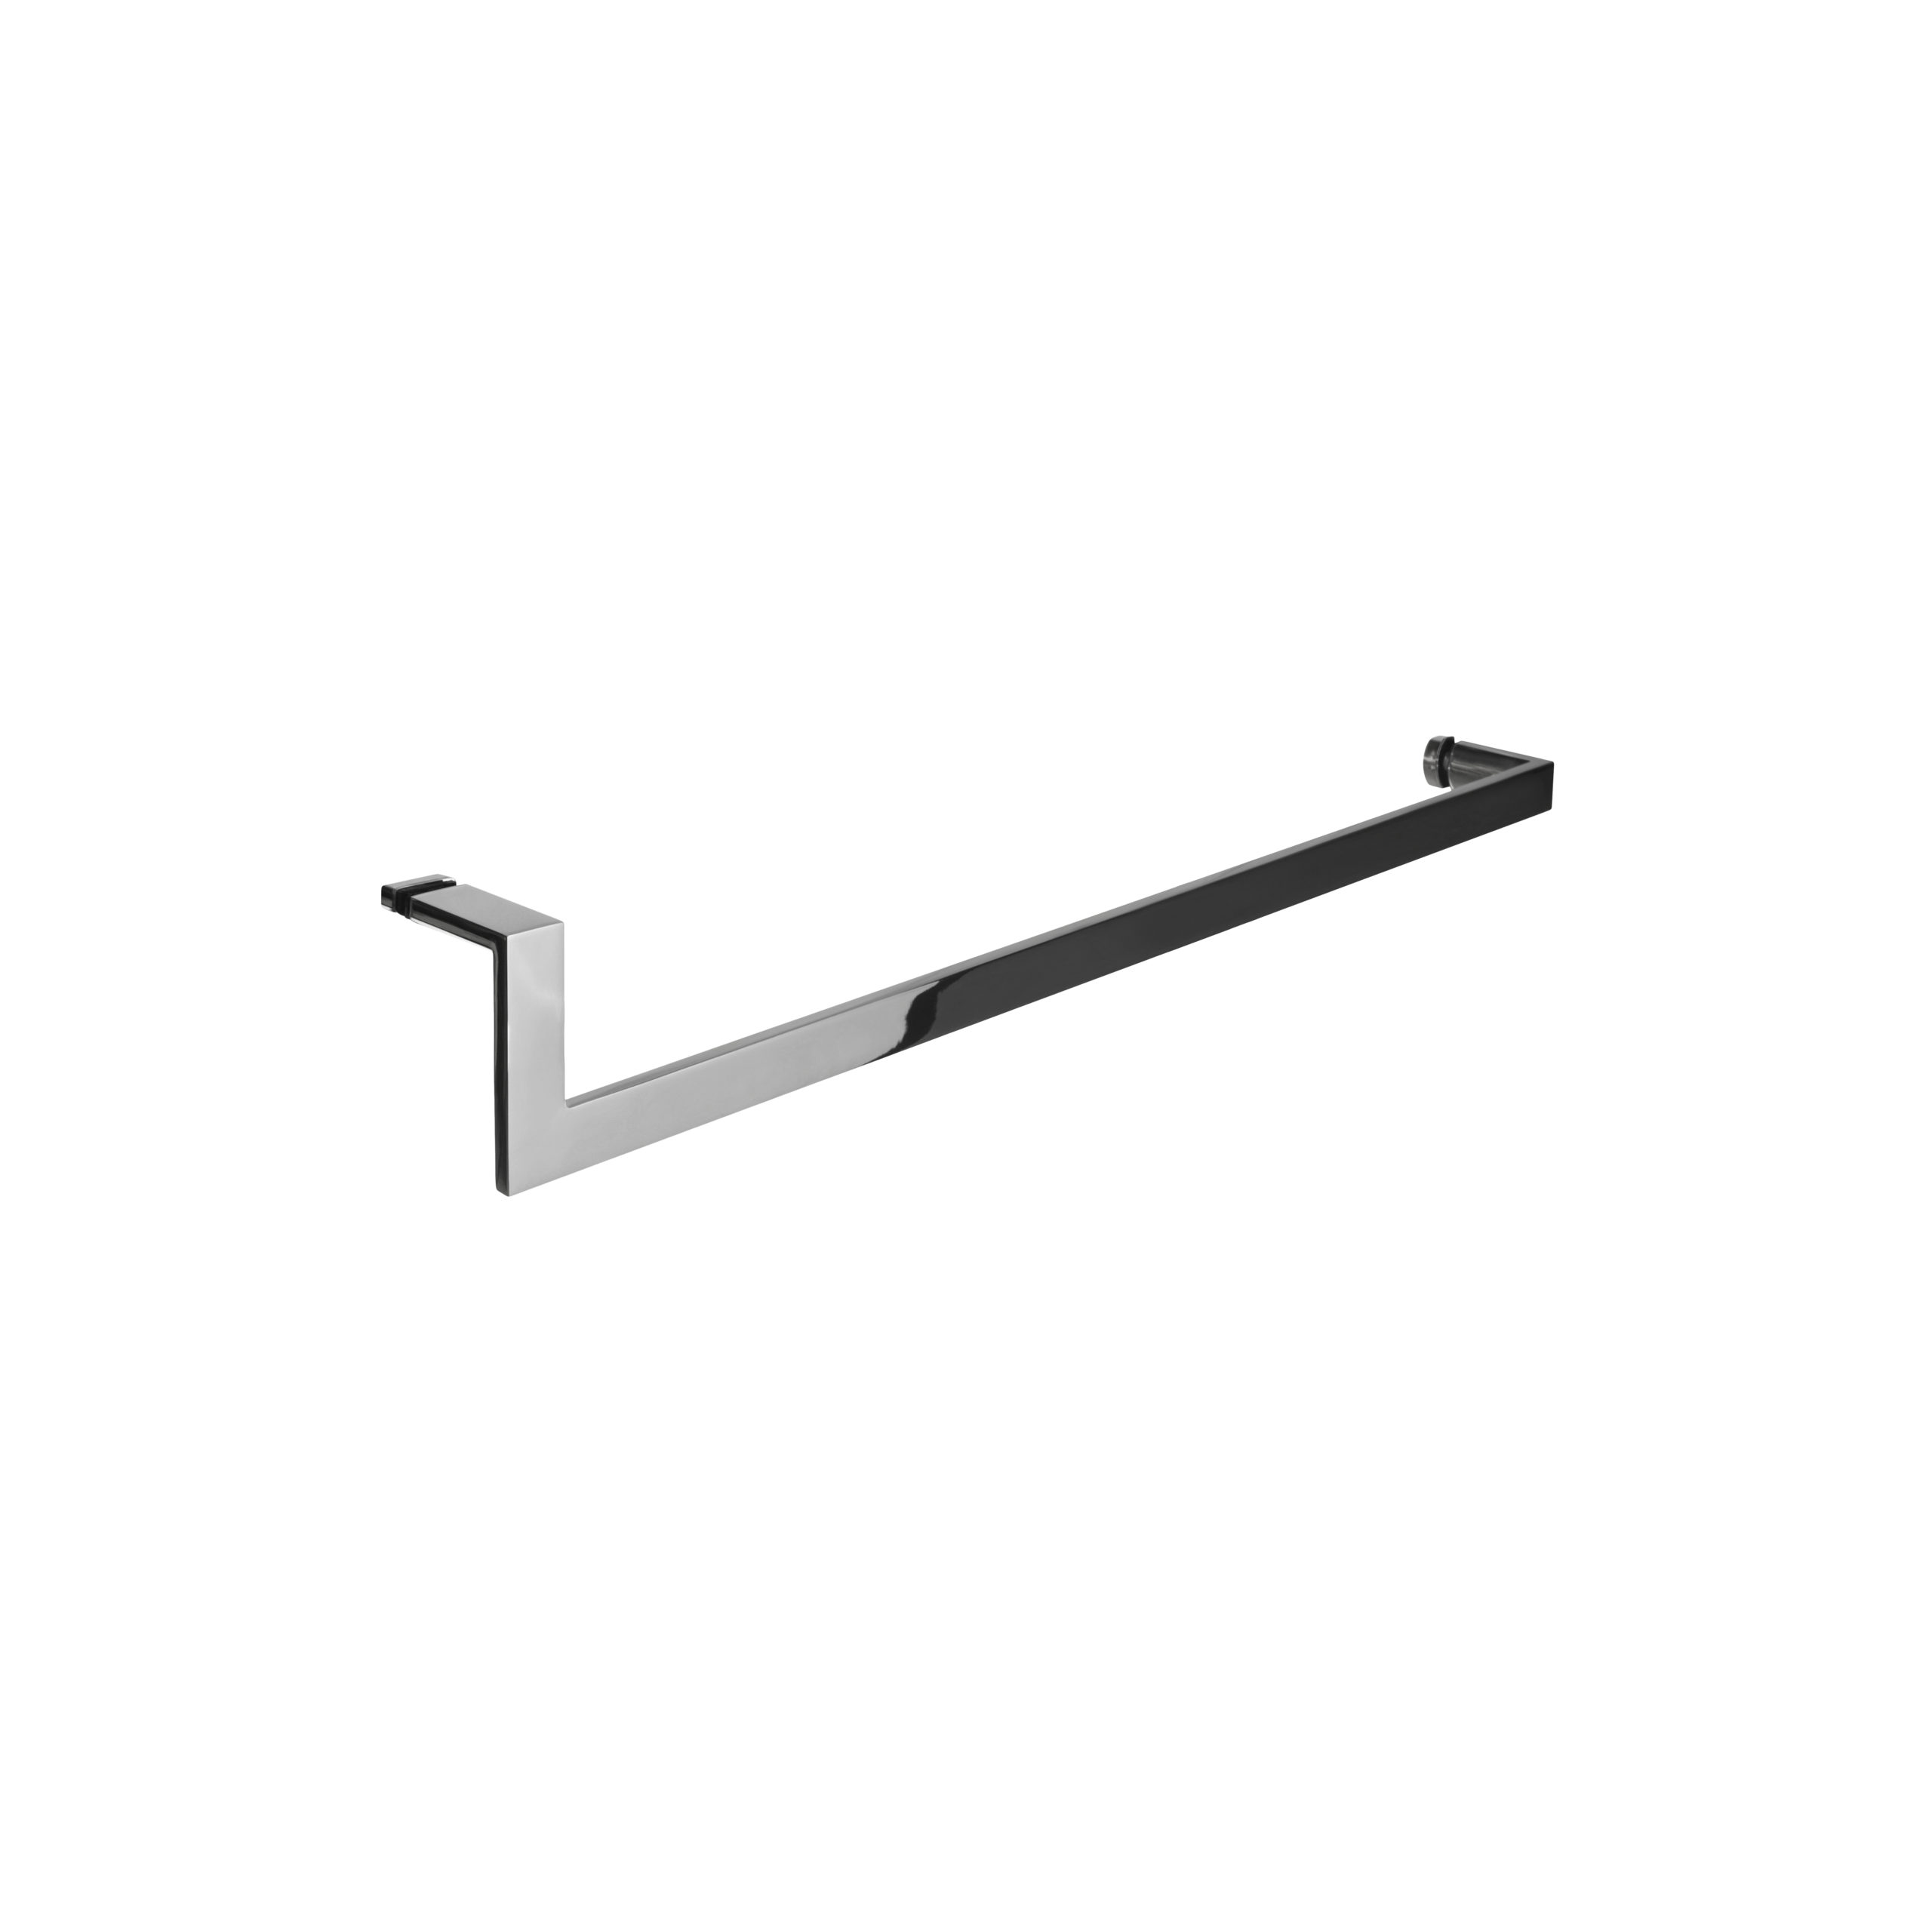 Polished stainless steel modern door handle - towel bar - product featured image - 24 inch length - product SKU JP 402-2 PSS